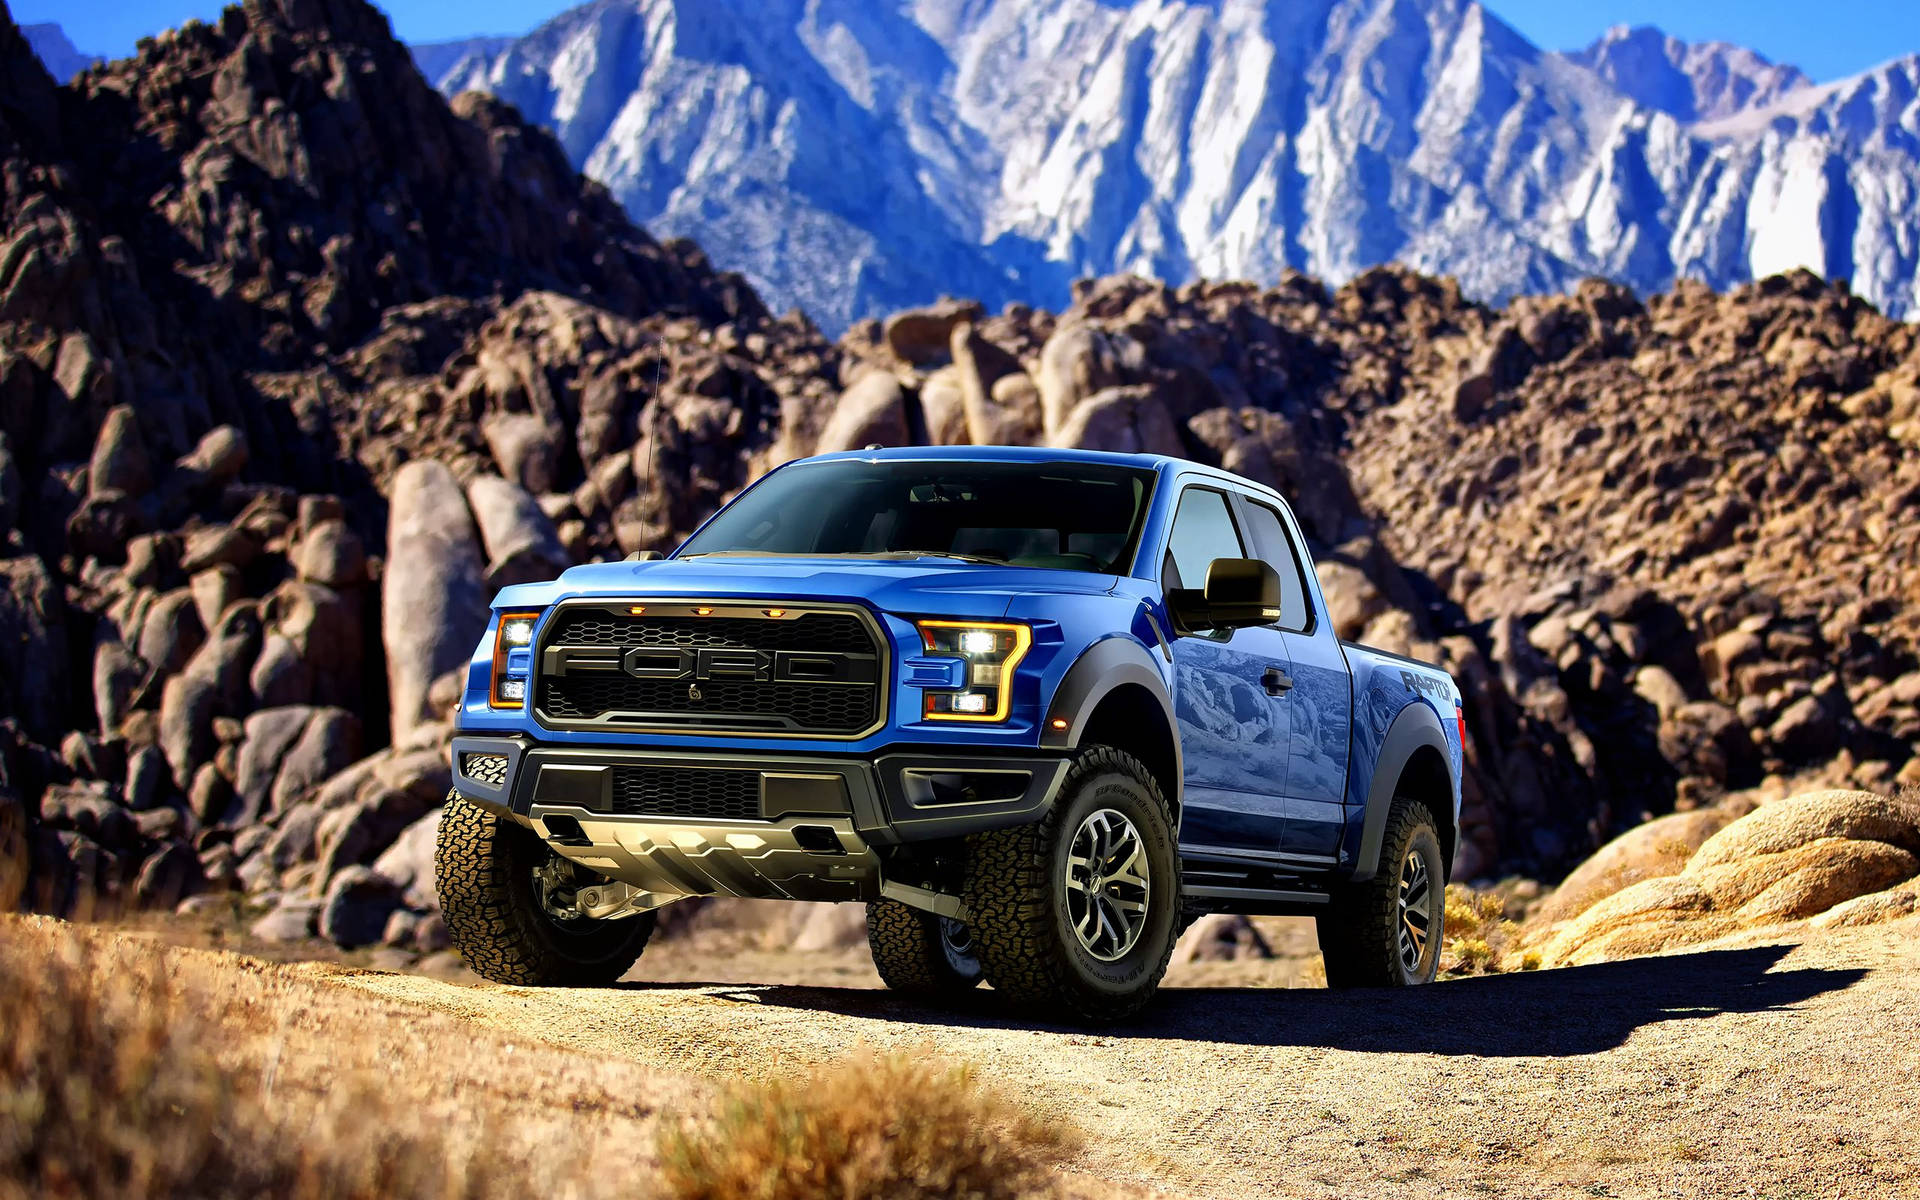 Free Ford Wallpaper Downloads, [200+] Ford Wallpapers for FREE |  Wallpapers.com